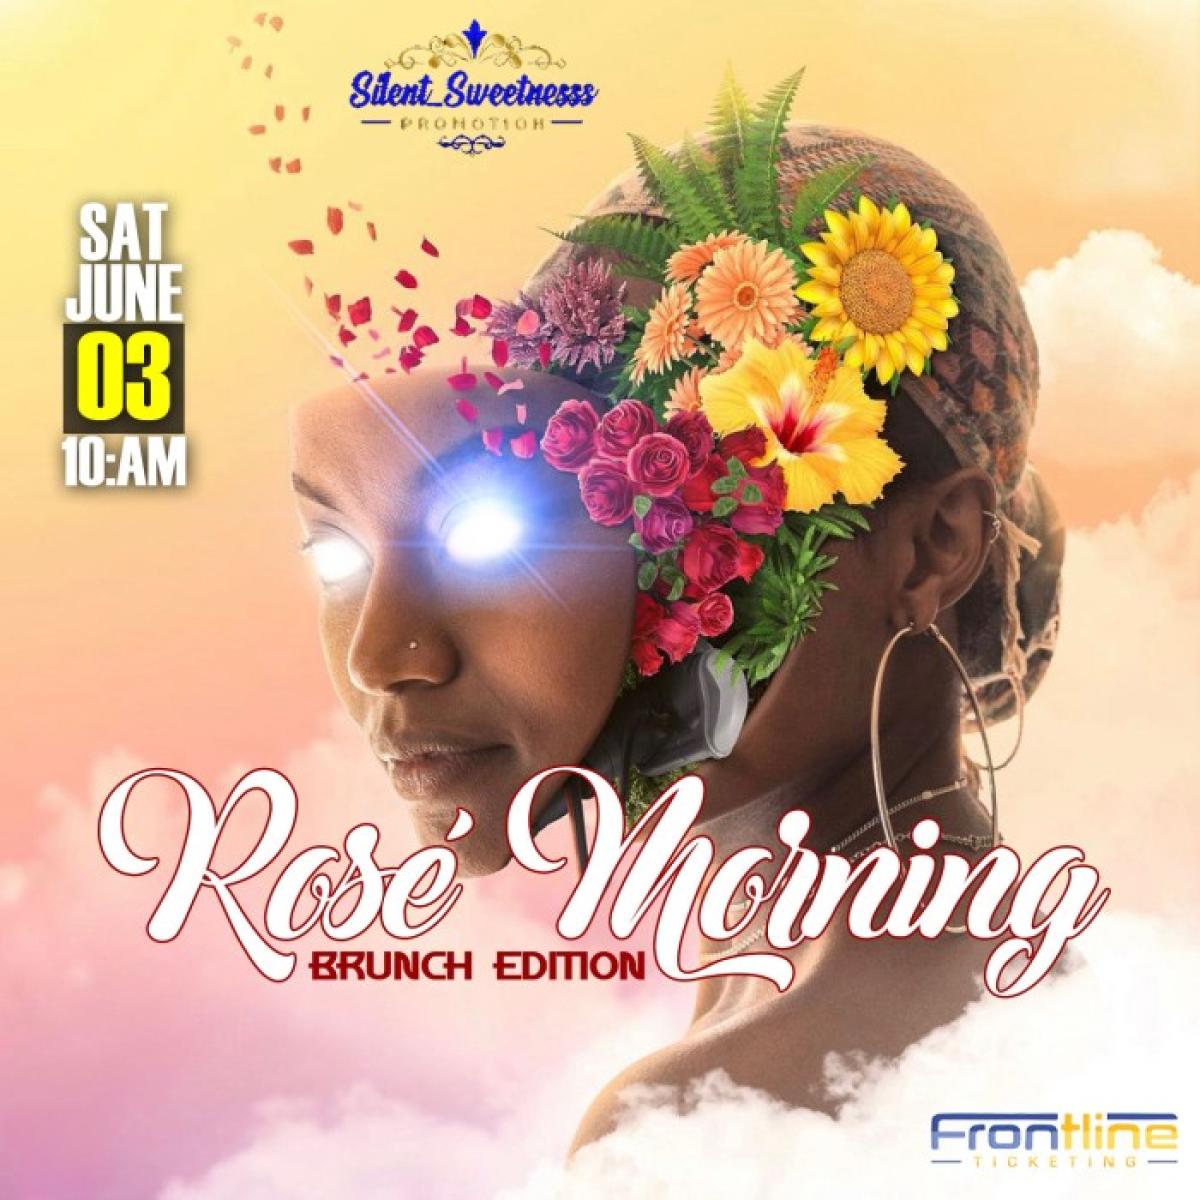 Rosé Morning flyer or graphic.